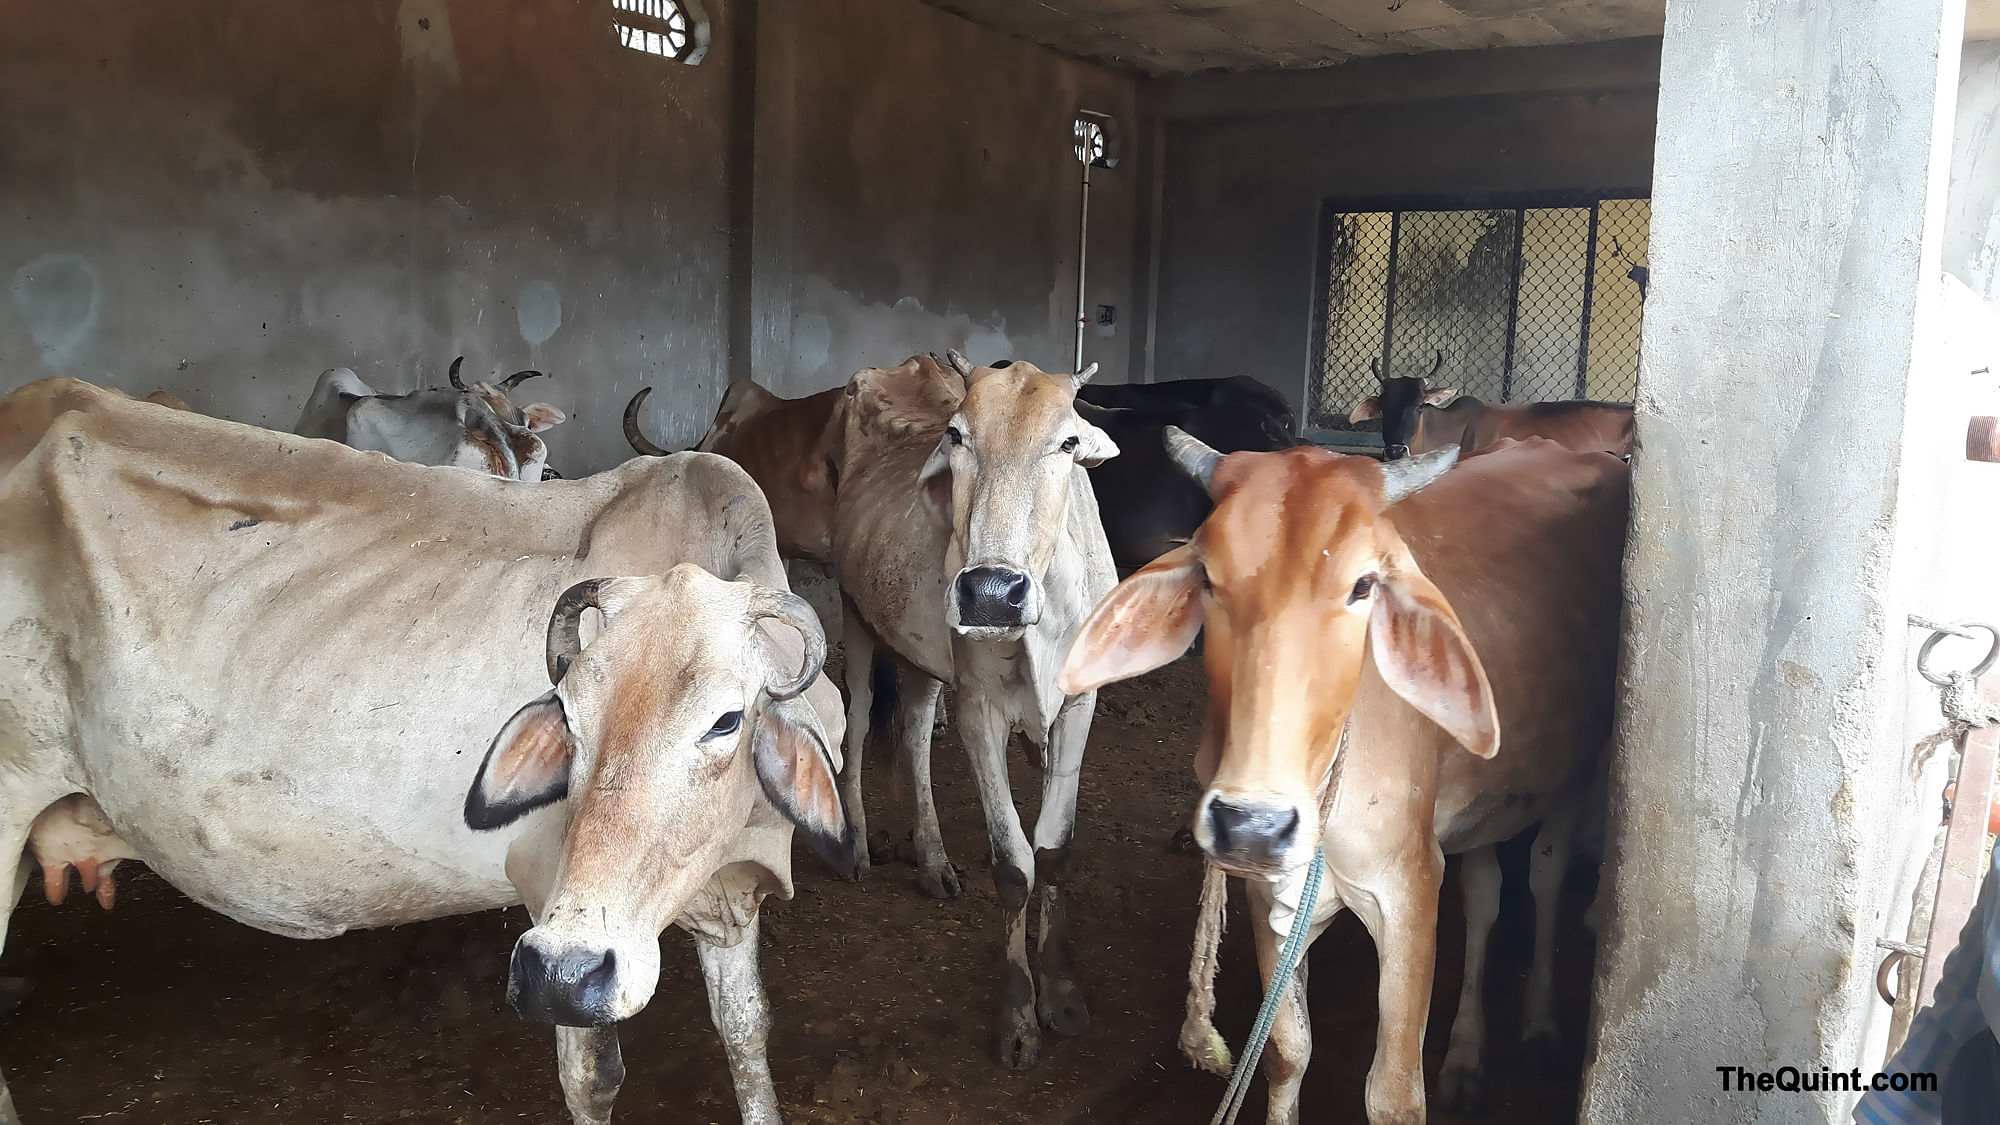 

The Quint goes deep into the interiors of Haryana to get details of how cow smuggling is operating on the ground. (Photo: Poonam Agarwal/The Quint)